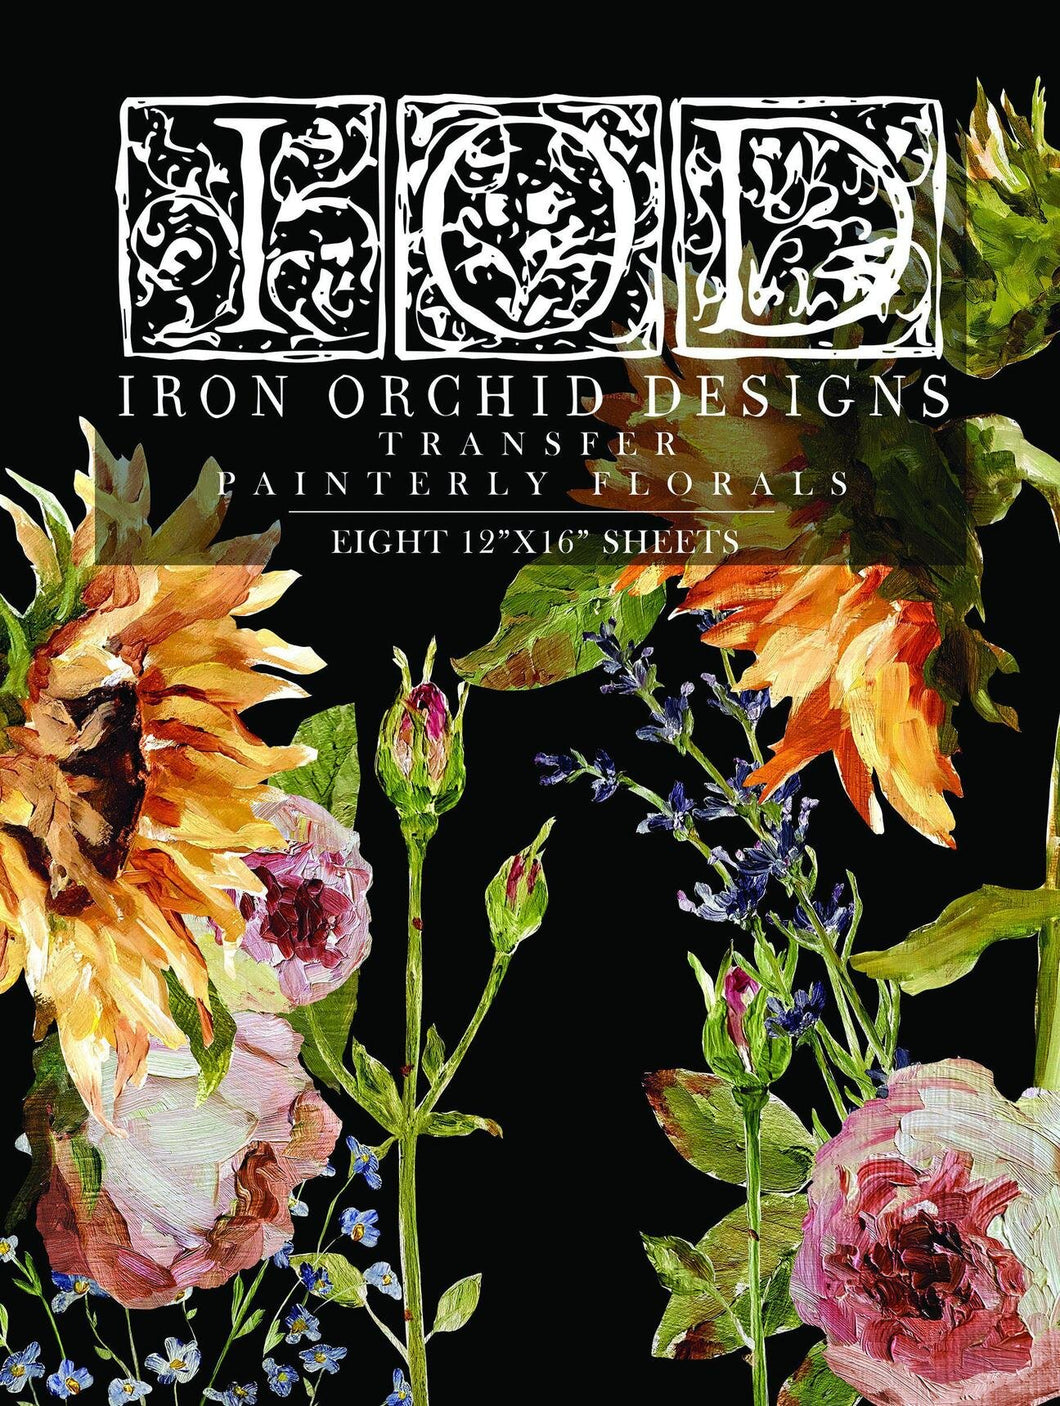 IOD Painterly Florals Decor Transfer - Iron Orchid Designs